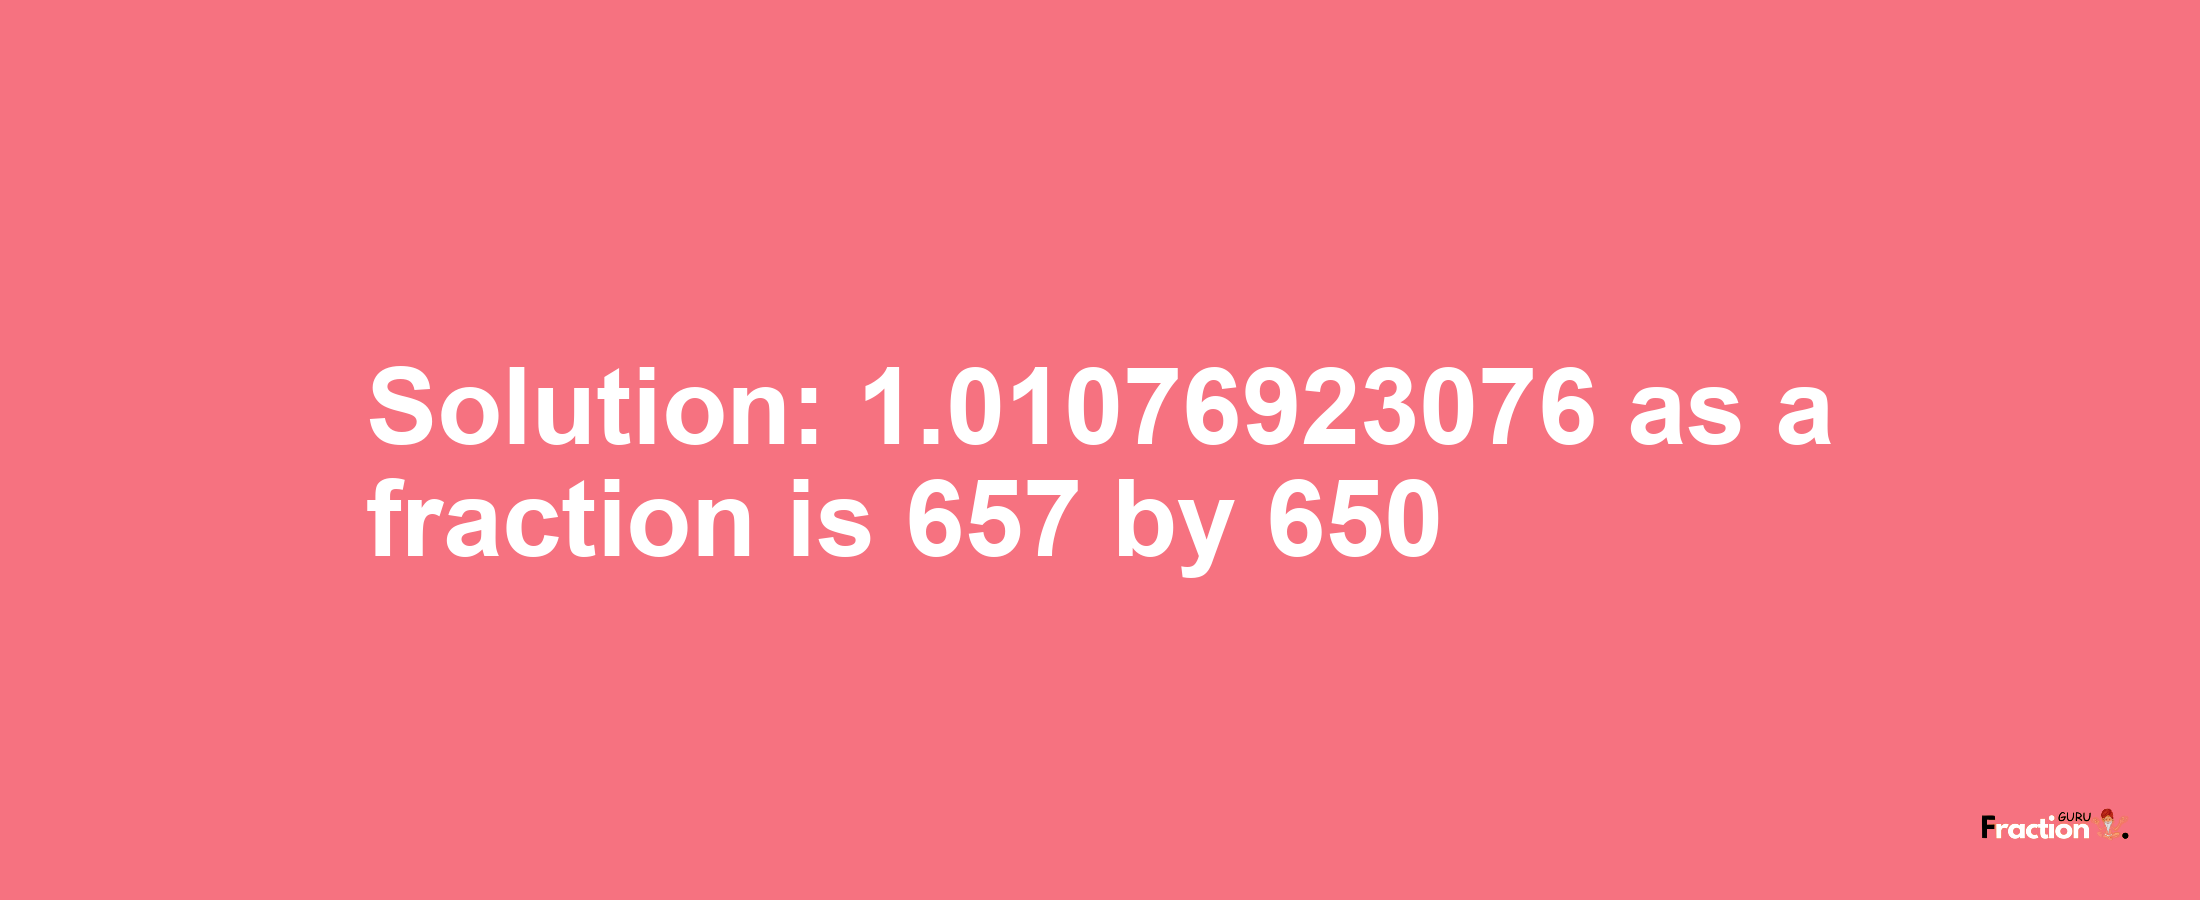 Solution:1.01076923076 as a fraction is 657/650